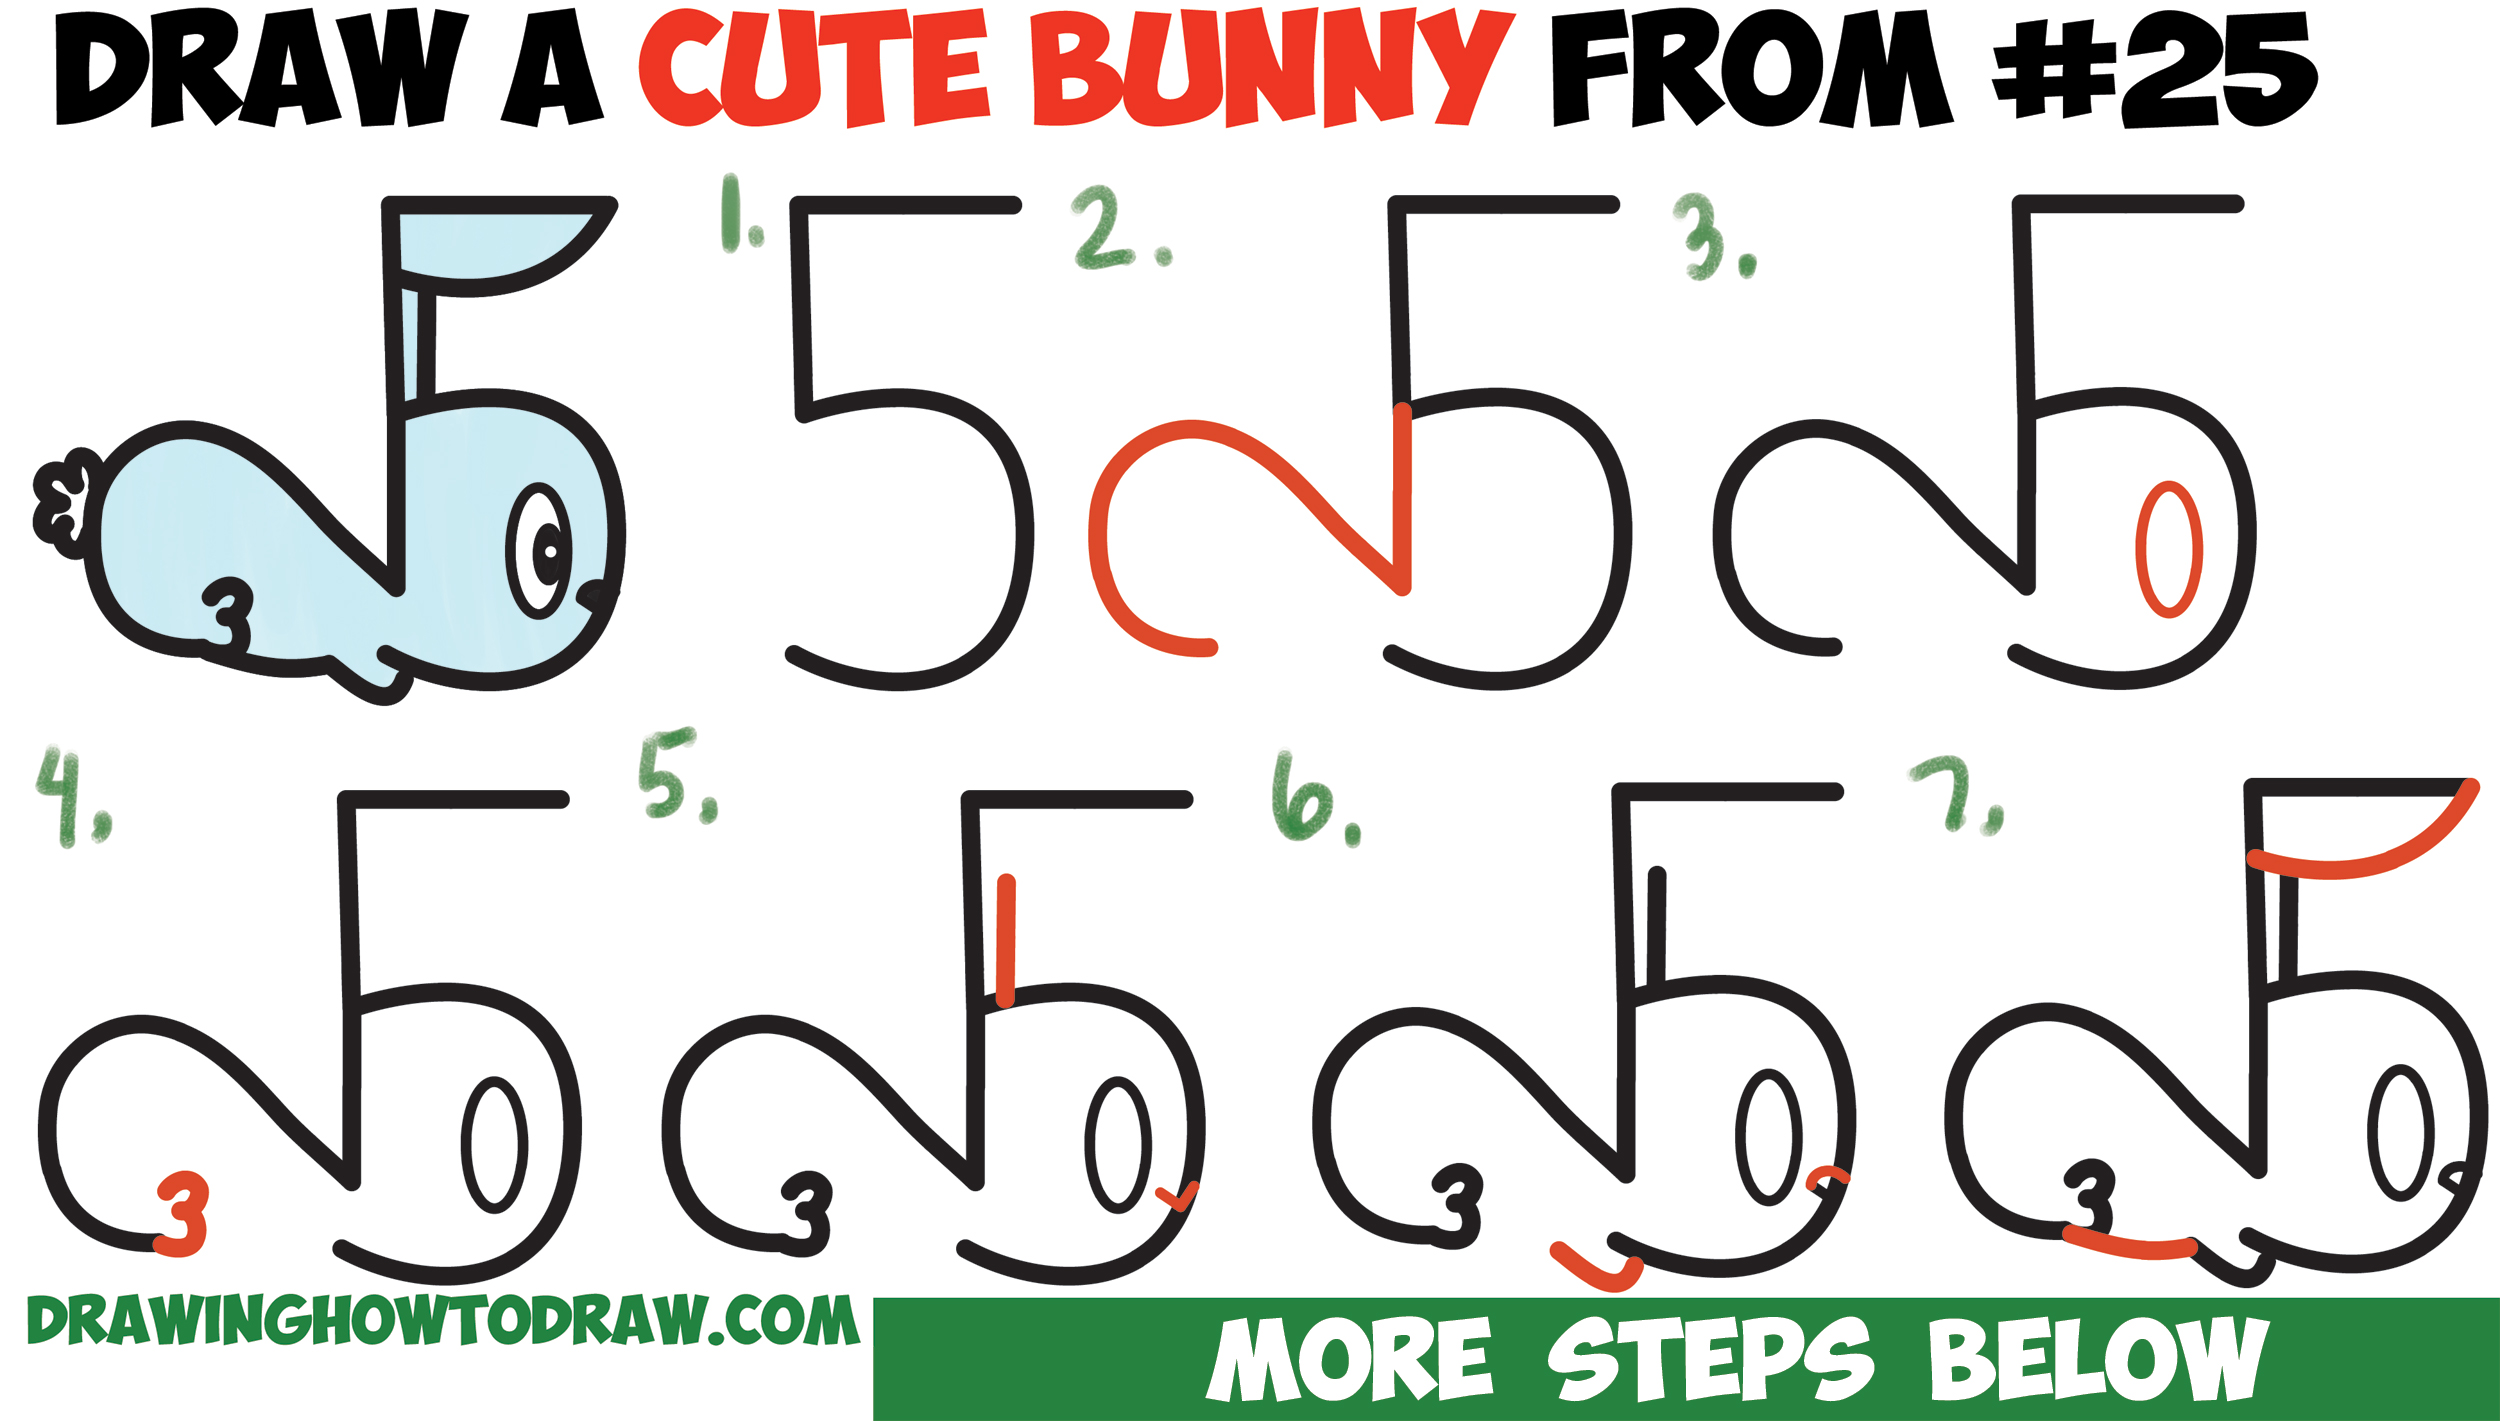 How to Draw a Cute Bunny in 5 Easy Steps